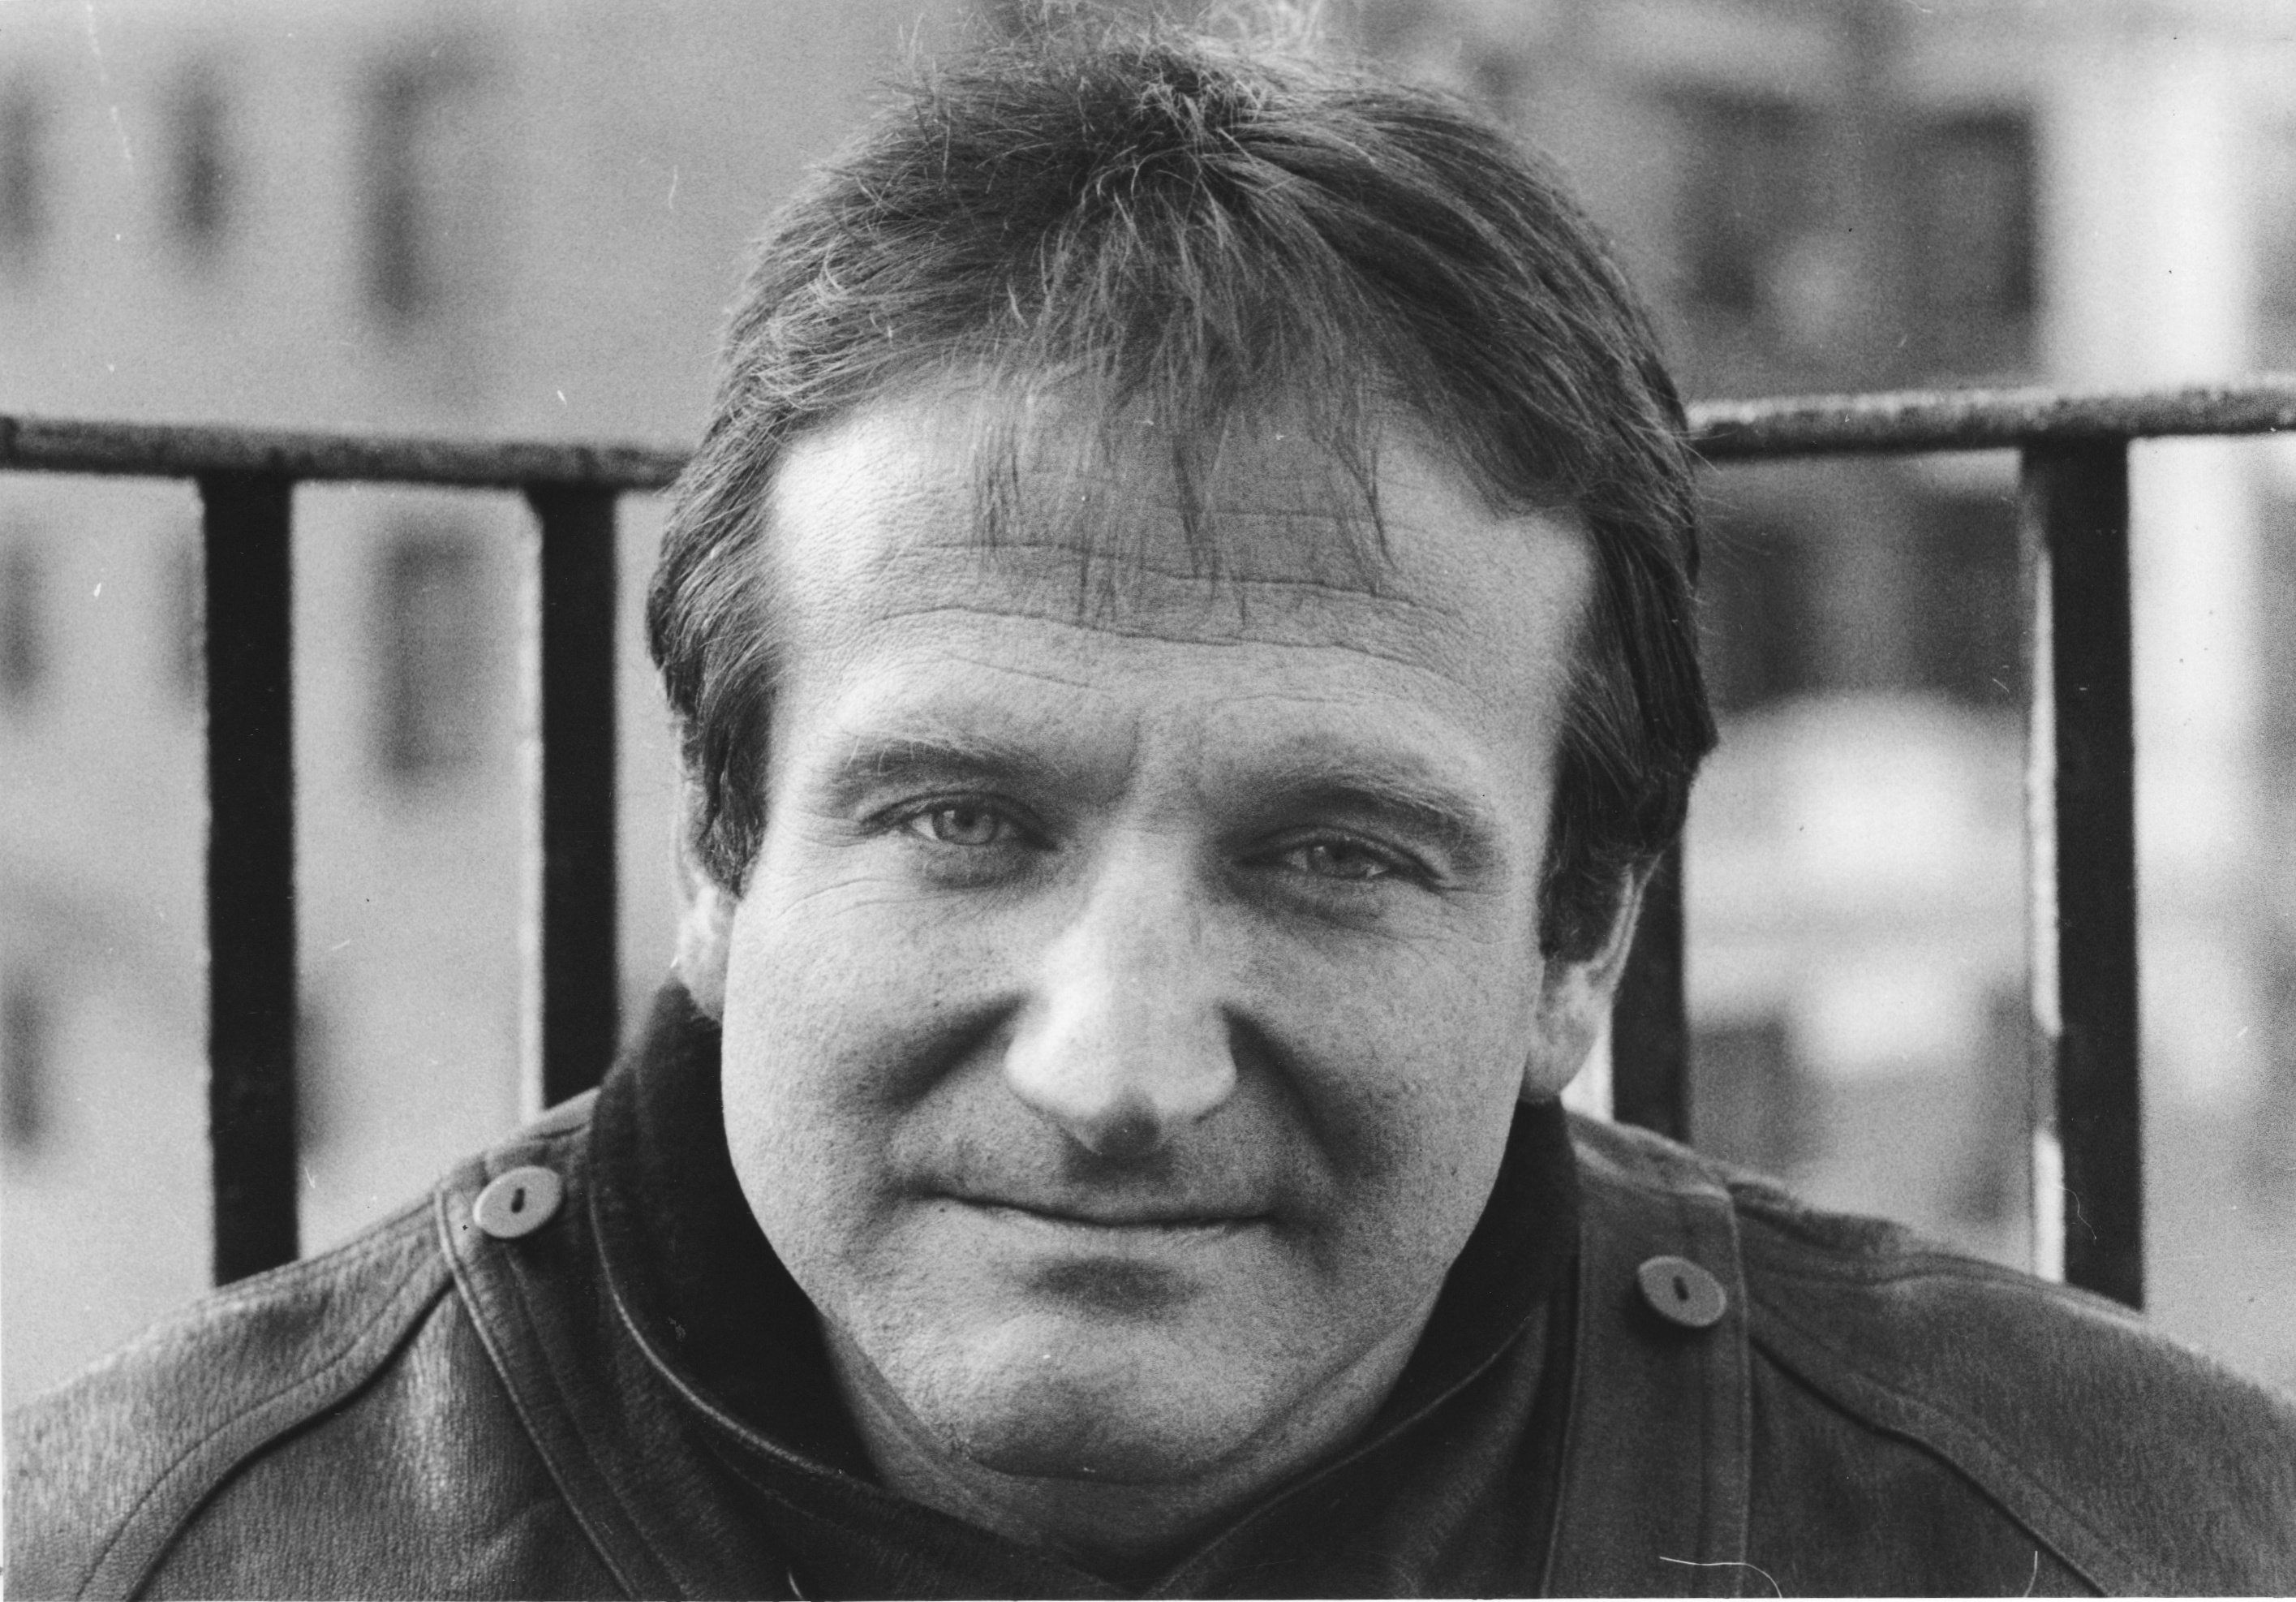 Actor and comedian Robin Williams poses for a photographer at the Carlyle Hotel in Manhattan, New York on December 8, 1987 | Source: Getty Images